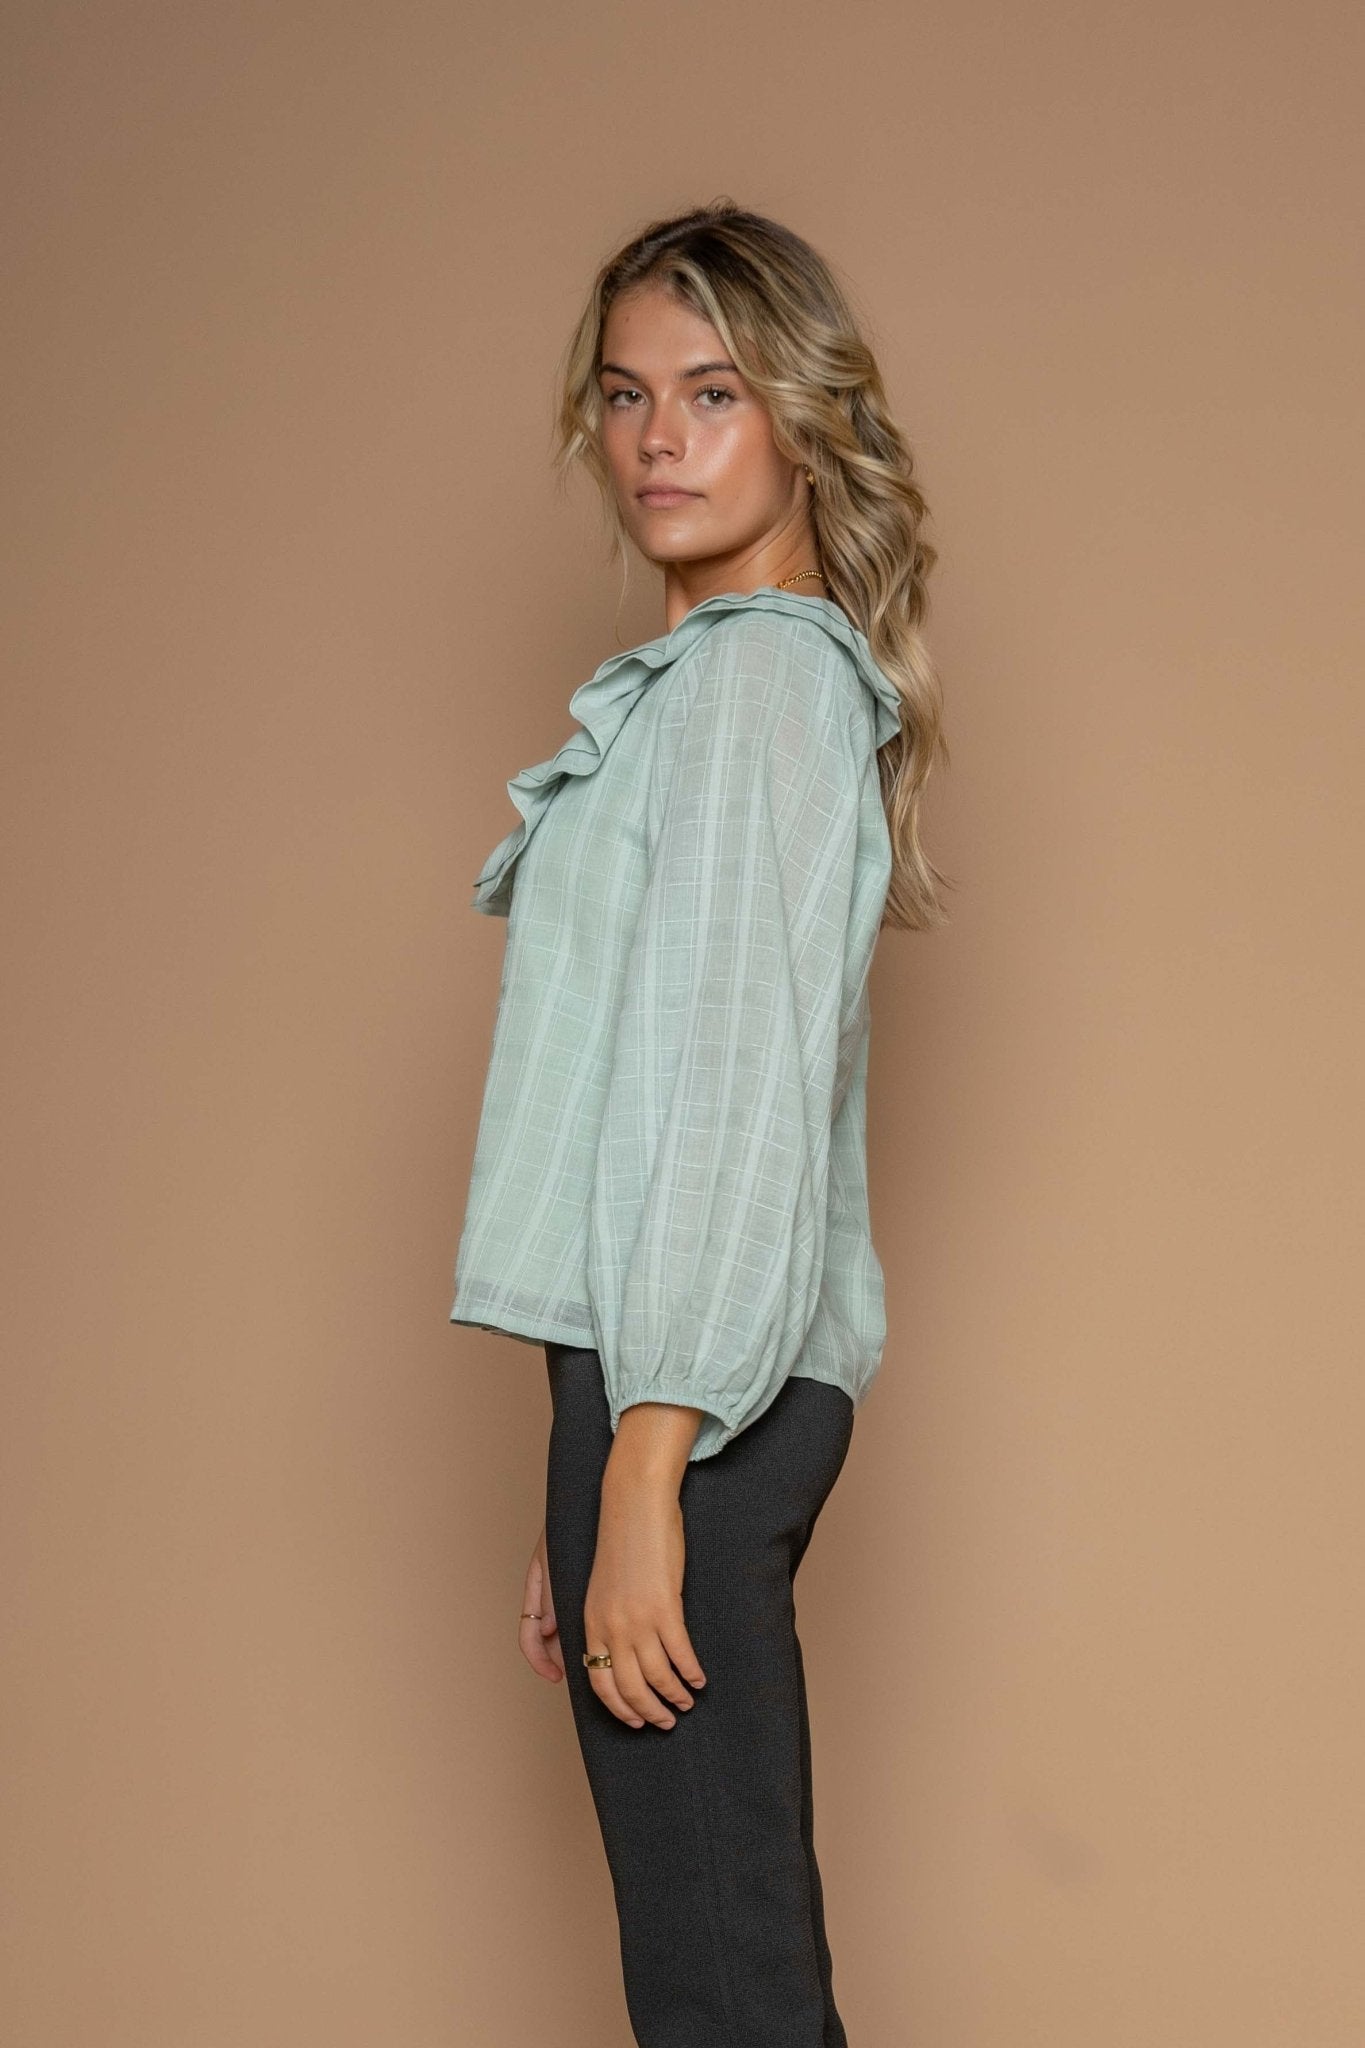 Silent Echo Avery Frill Neck Blouse in Arctic - Hey Sara